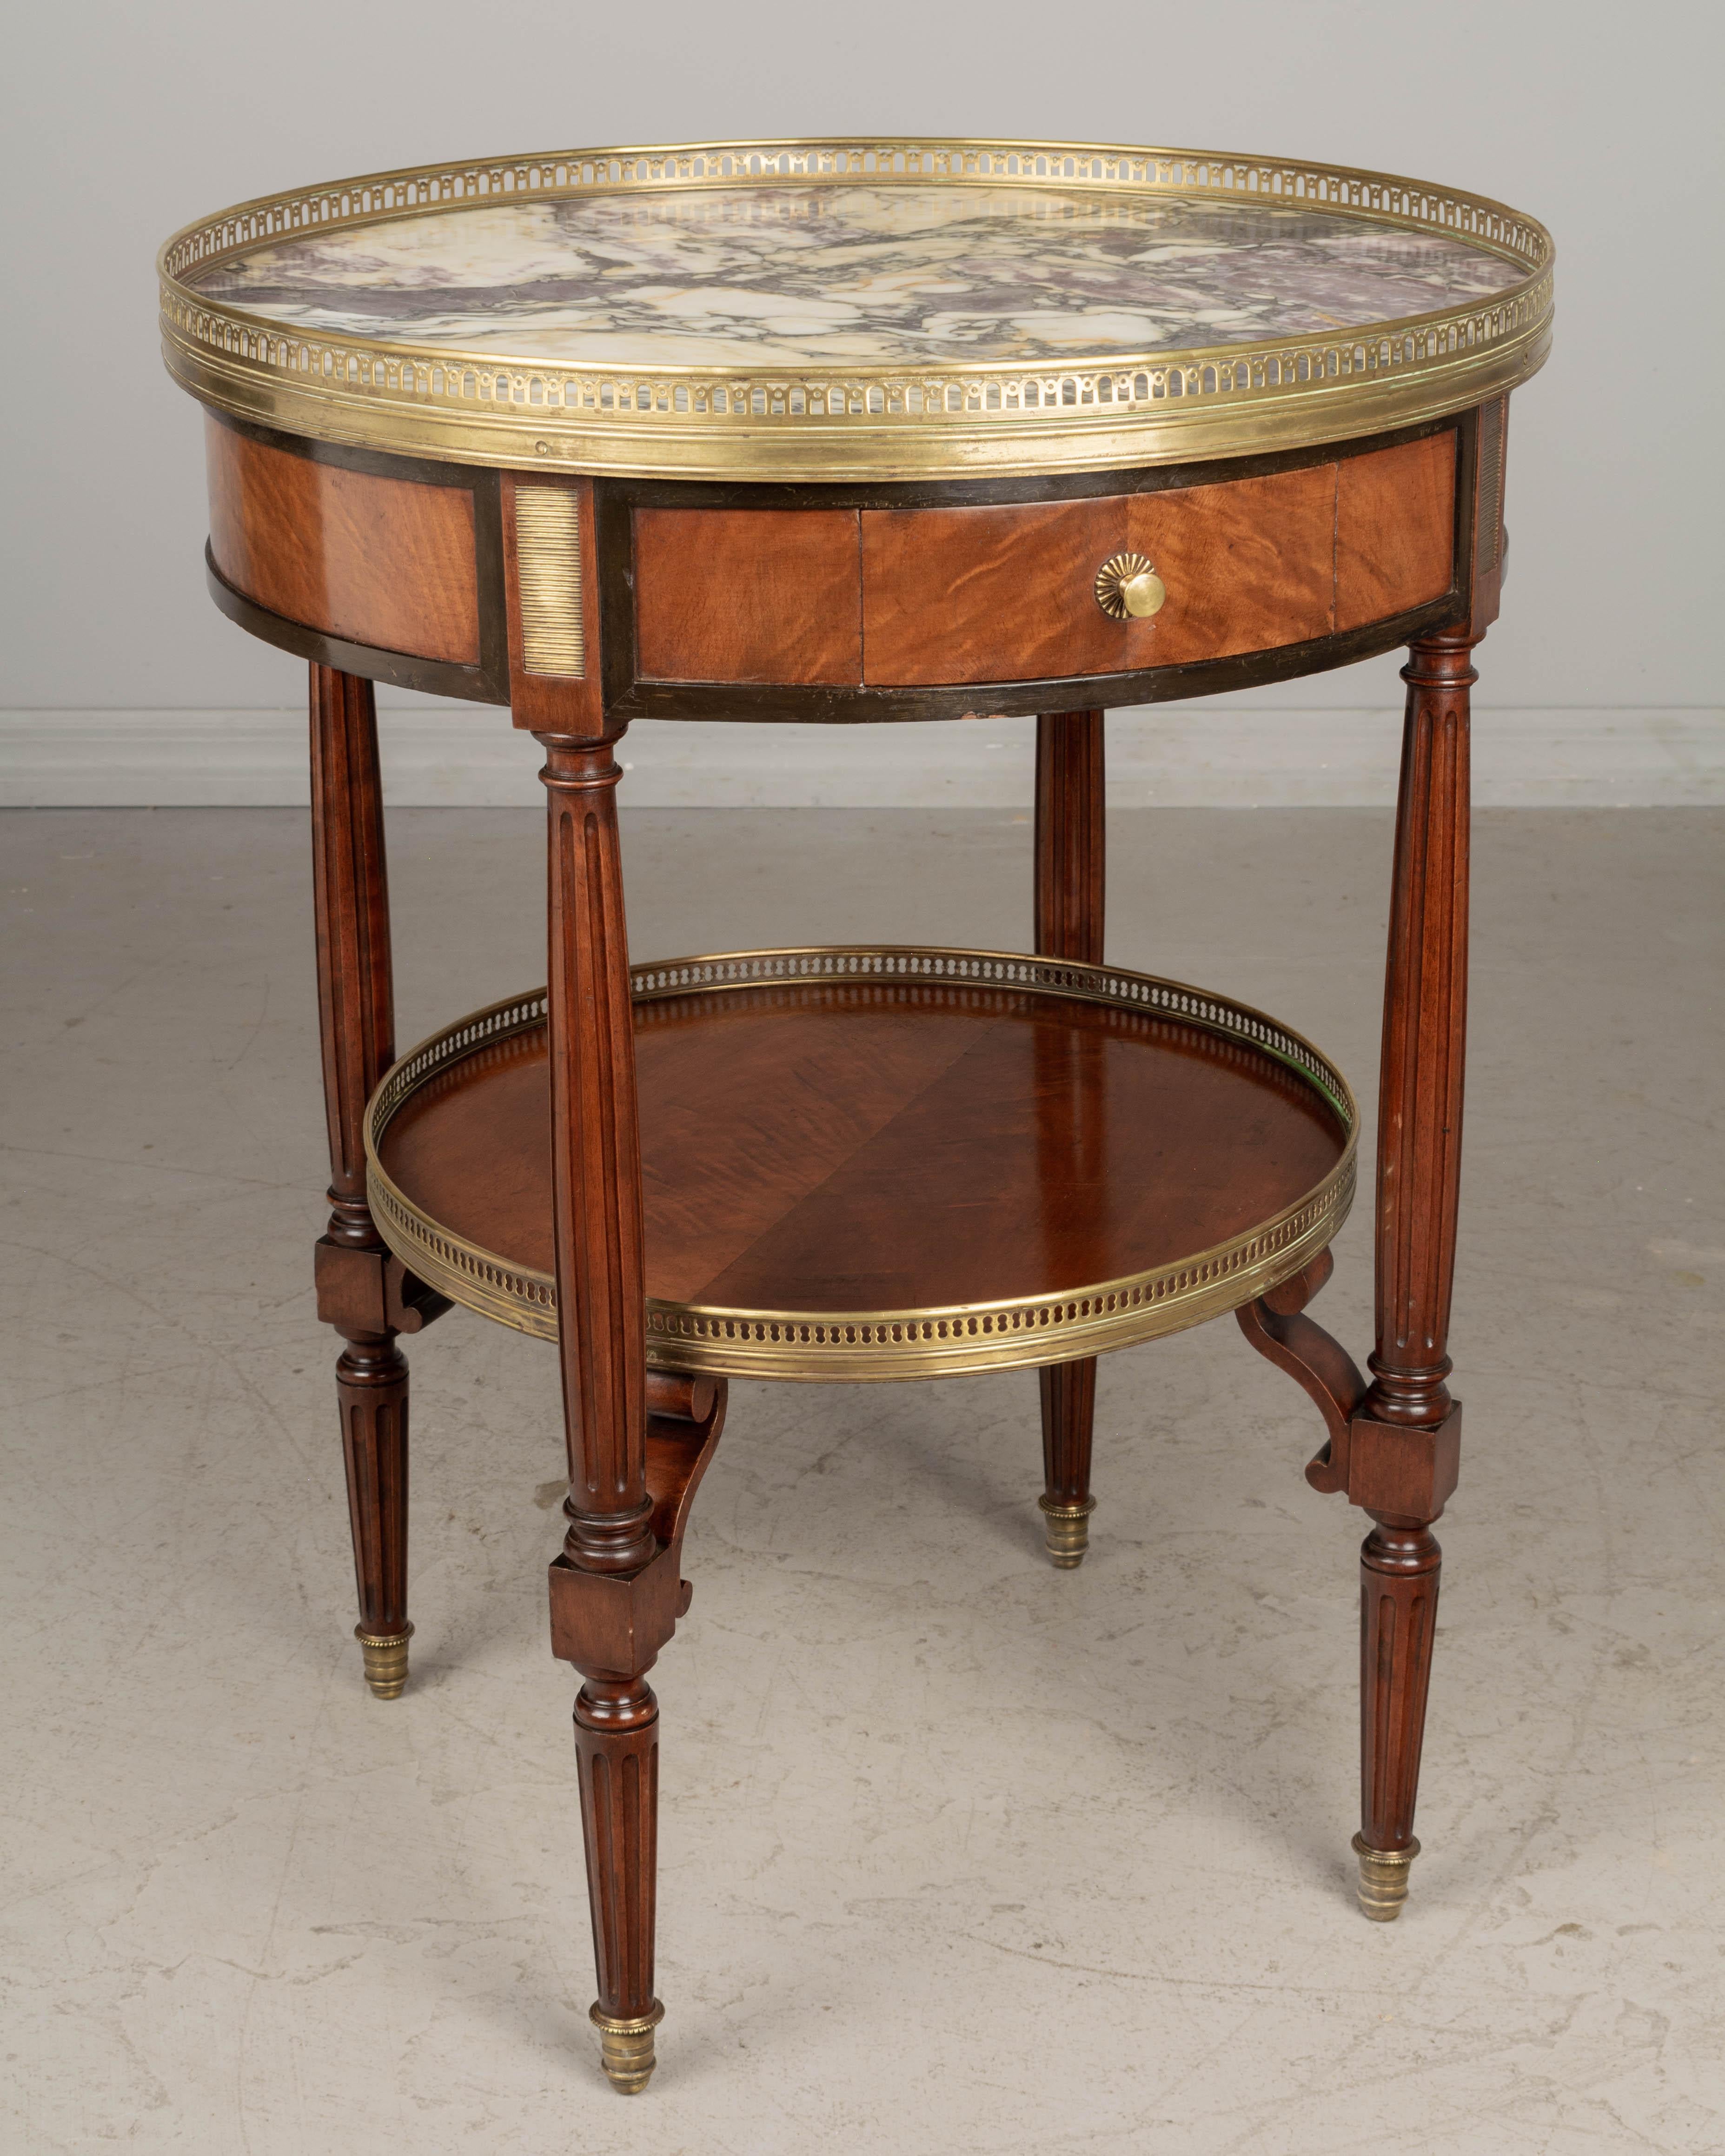 A Louis XVI style marble top bouillotte table made of solid and veneer of mahogany with a small dovetailed drawer, fluted tapered legs and lower shelf. Marble top from the Pyrenées surrounded by a brass galleries and decorative elements and sabots.